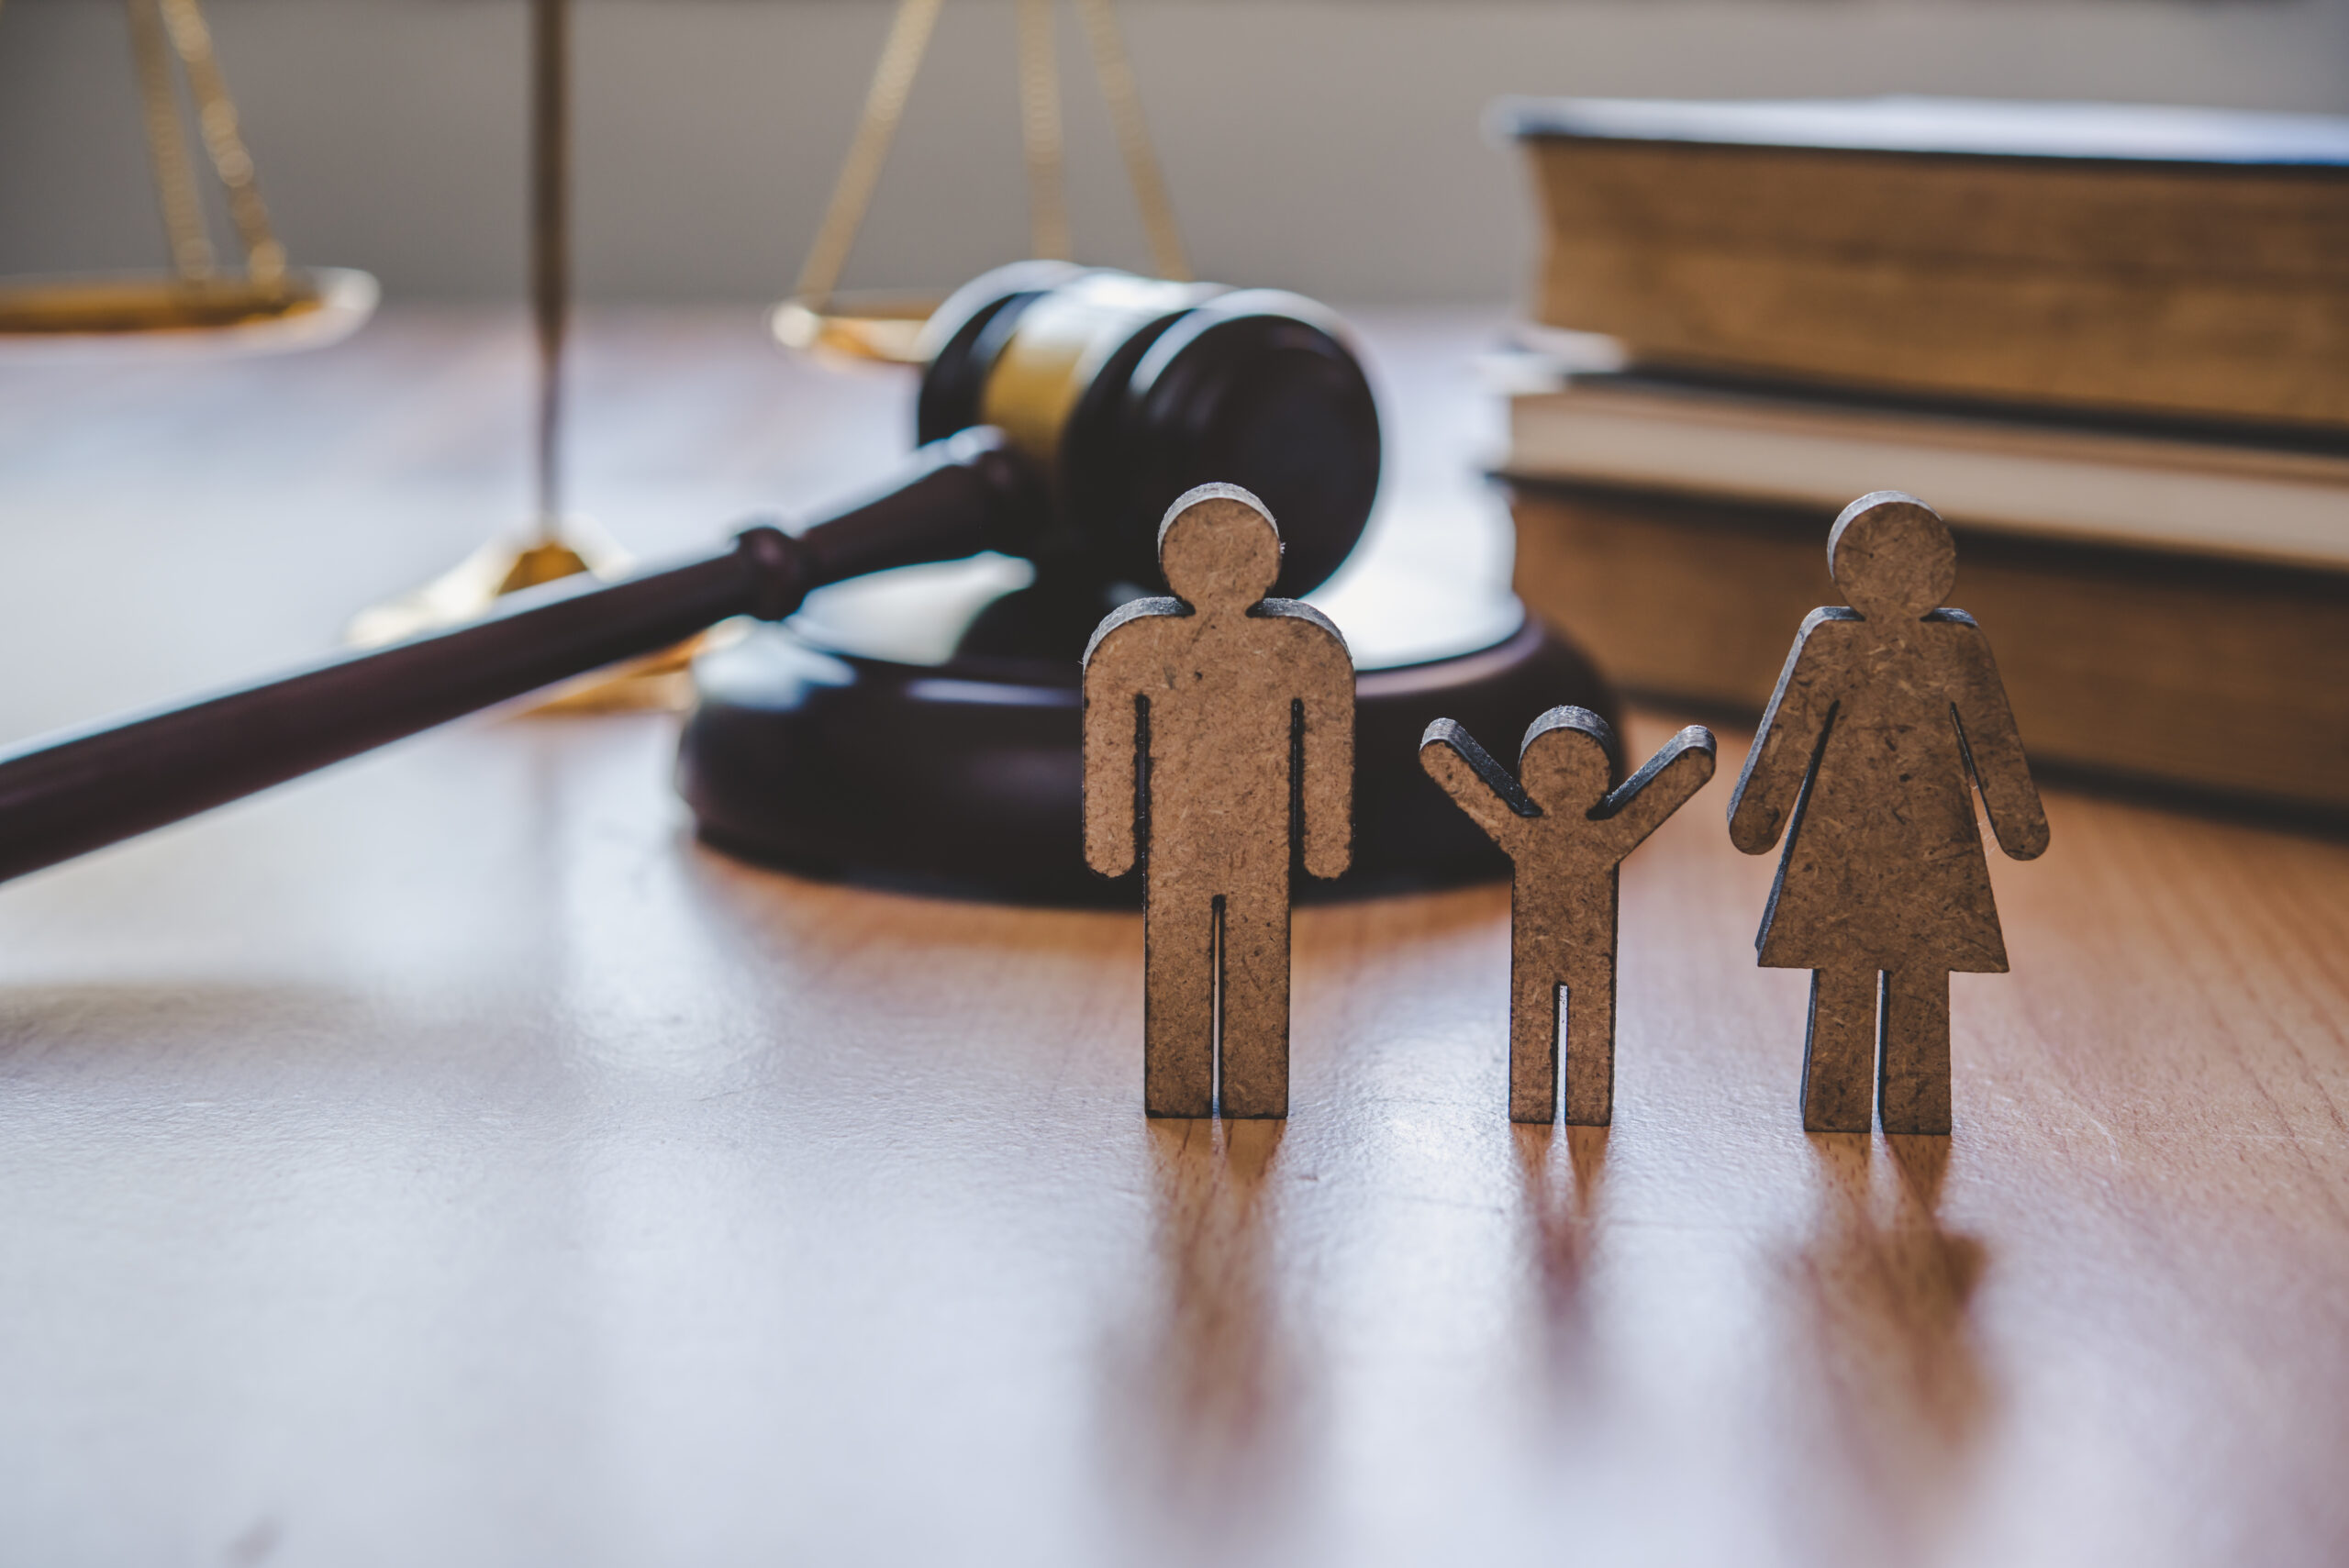 Divorce and Family Law